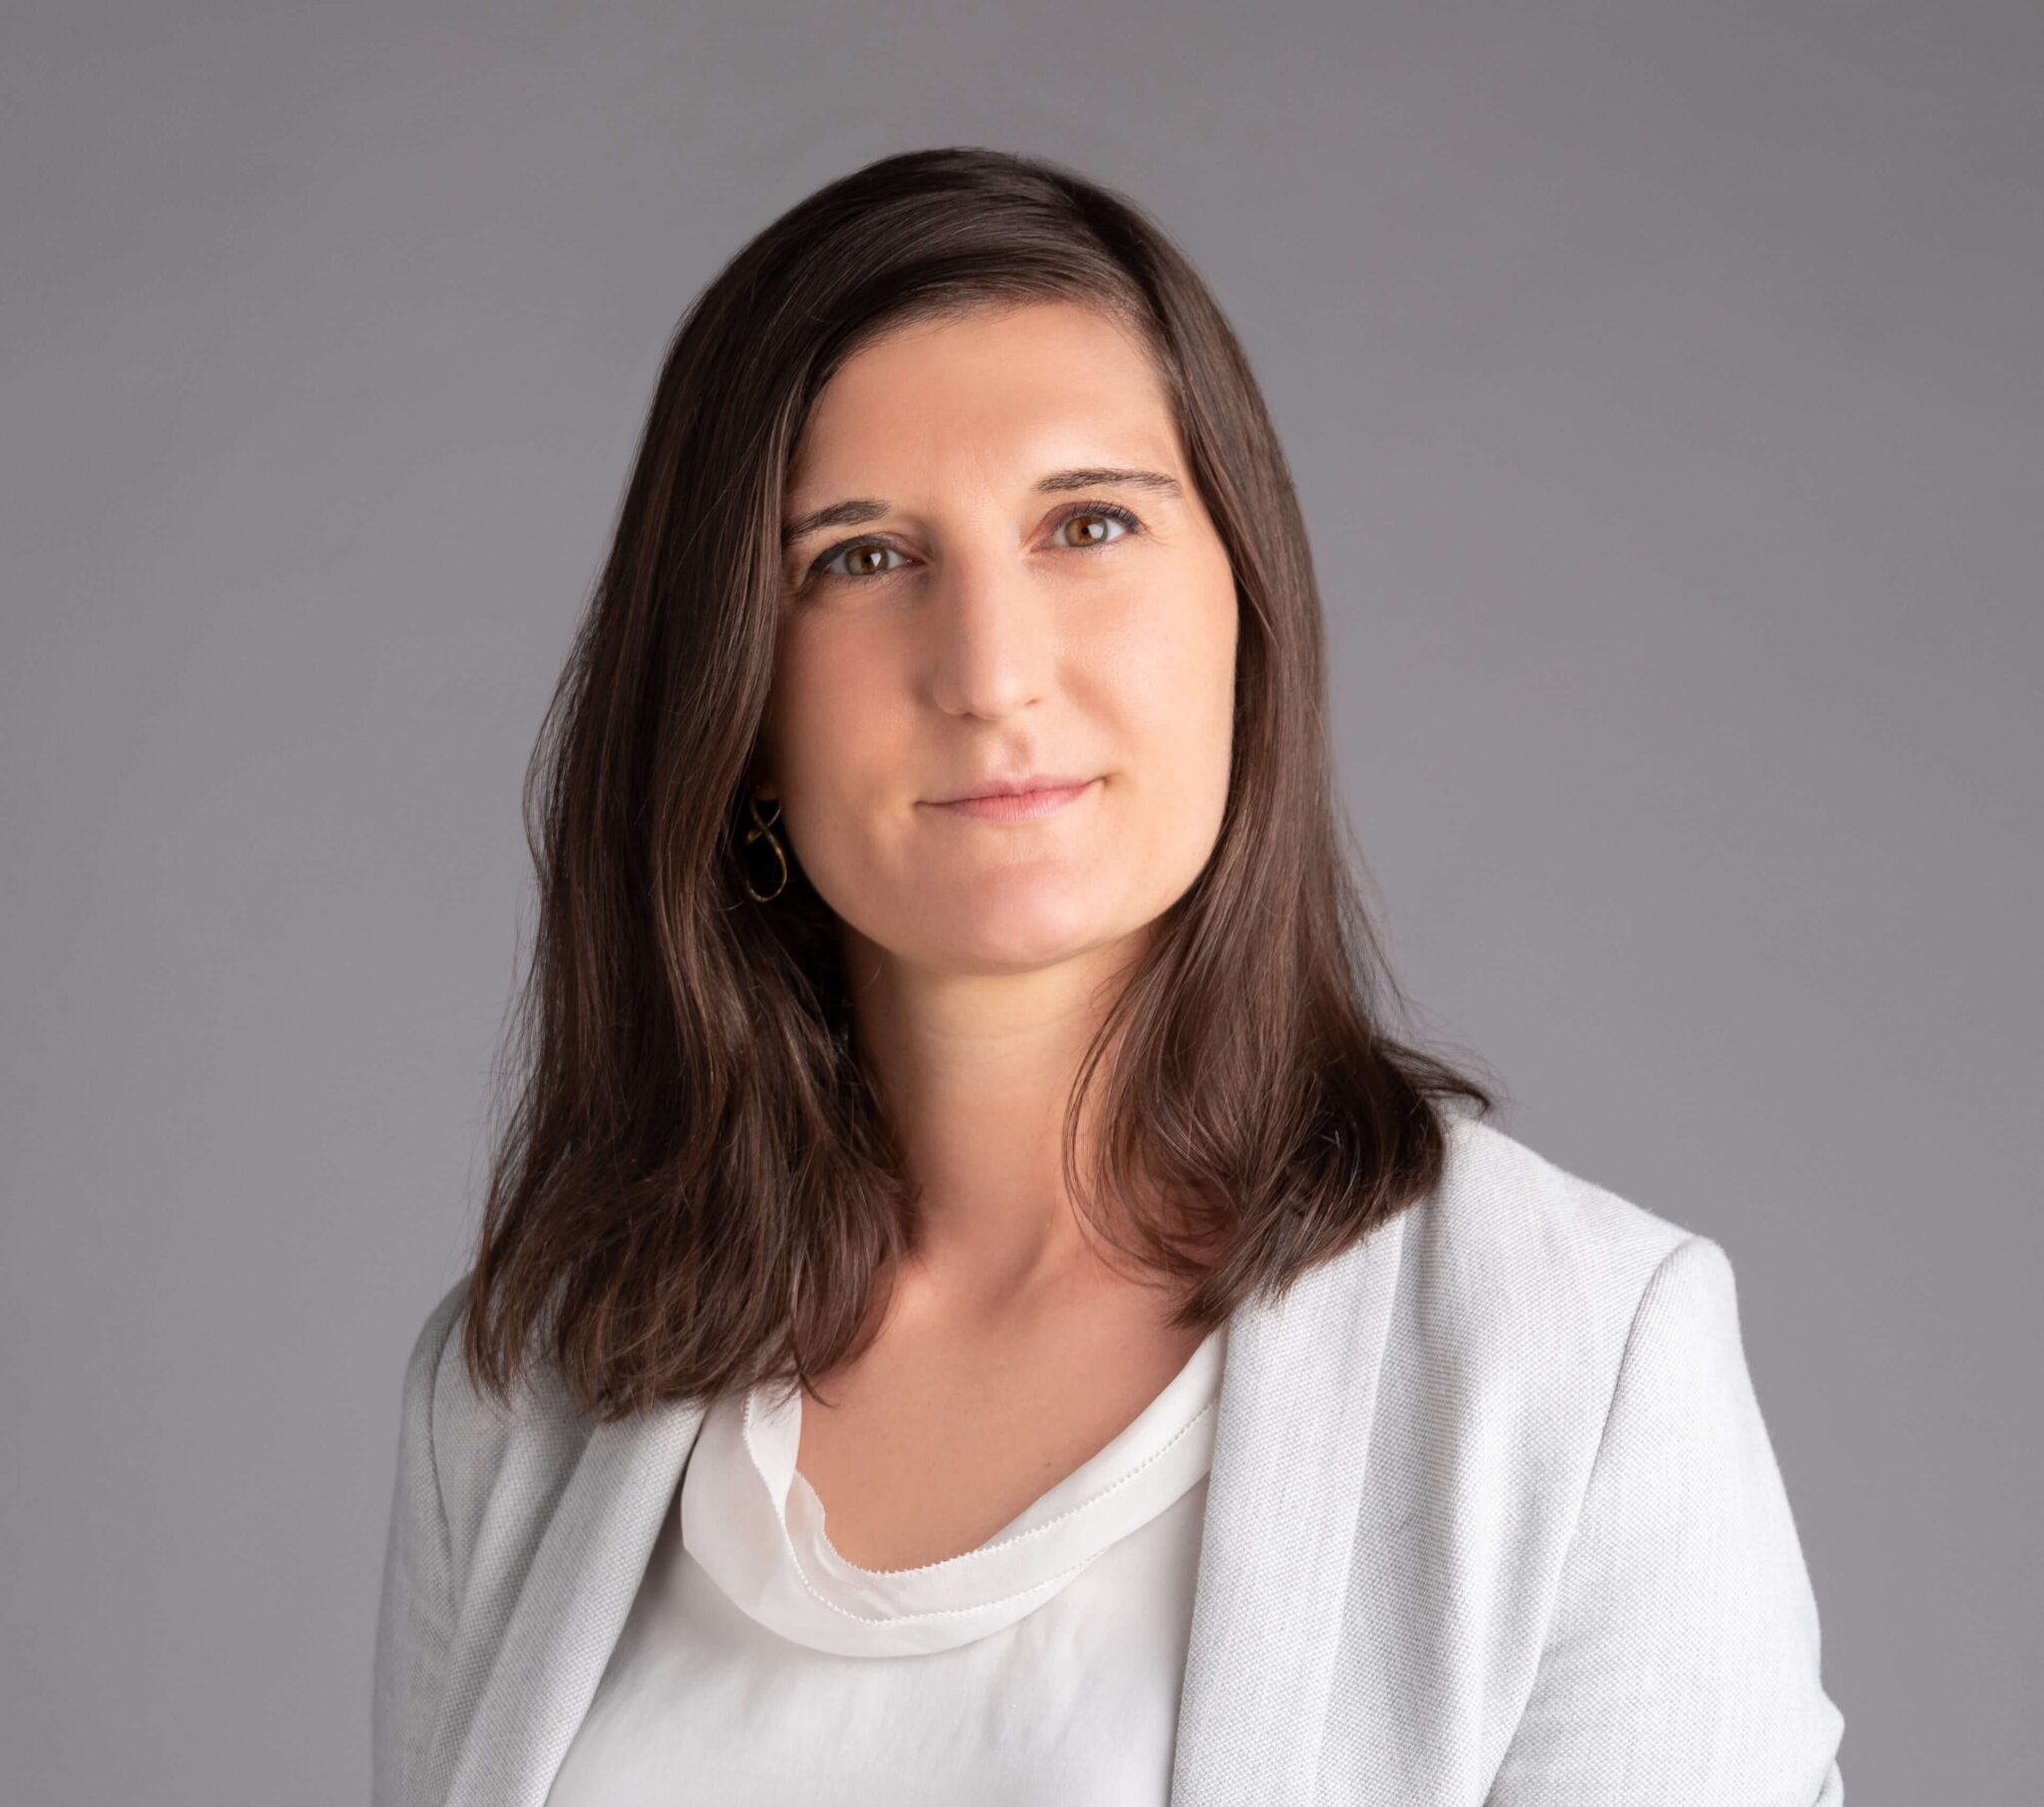 Head of Brand and Communications at Know Your Customer, Margherita Maspero